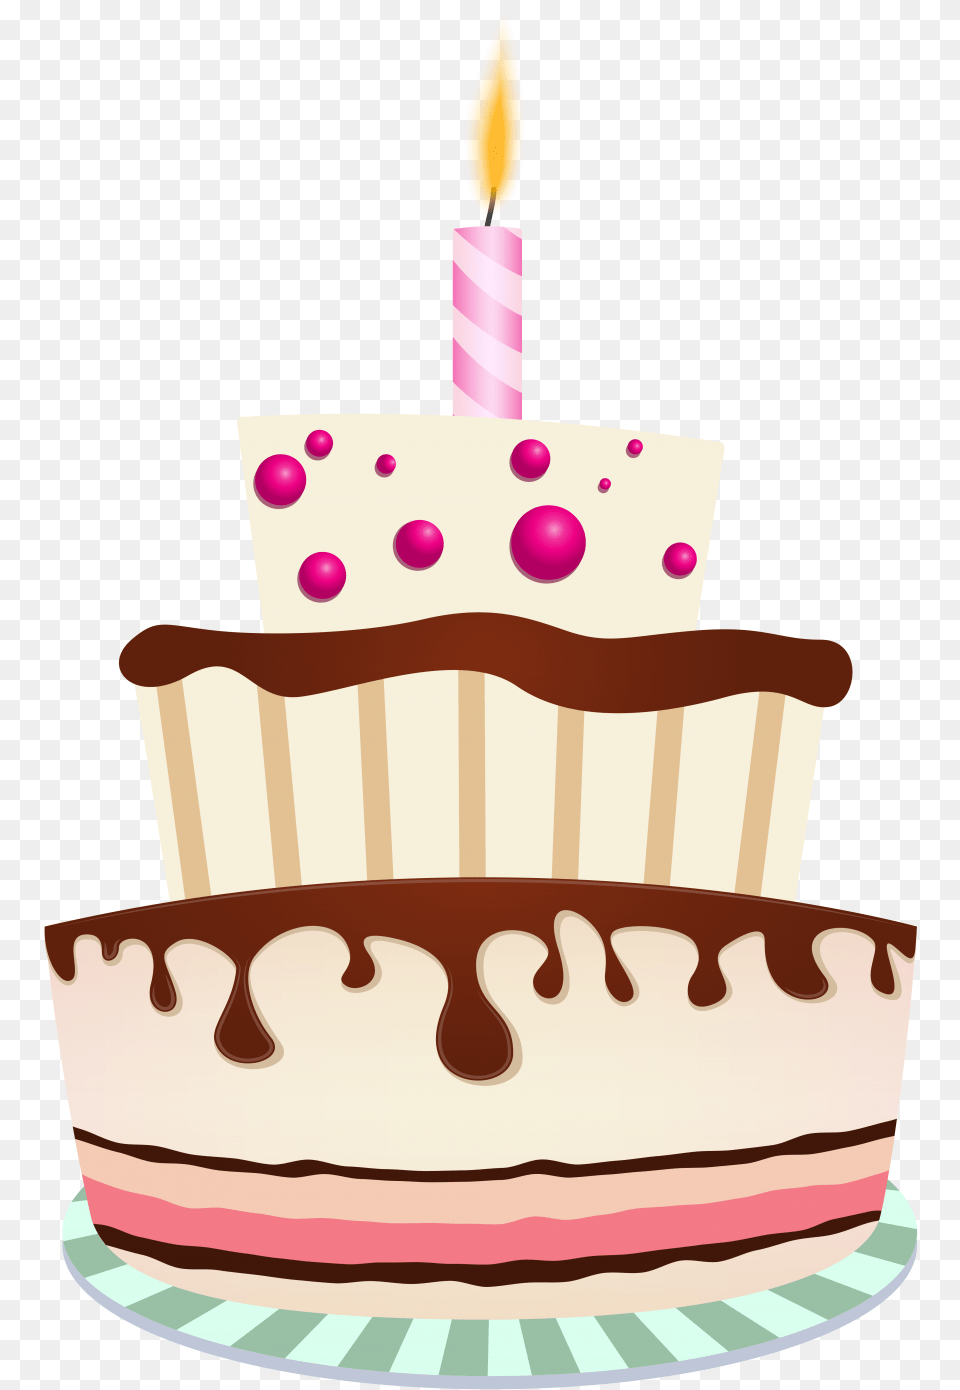 Birthday Cakes Cake With One Candle Cake And Candle, Birthday Cake, Food, Dessert, Cream Free Png